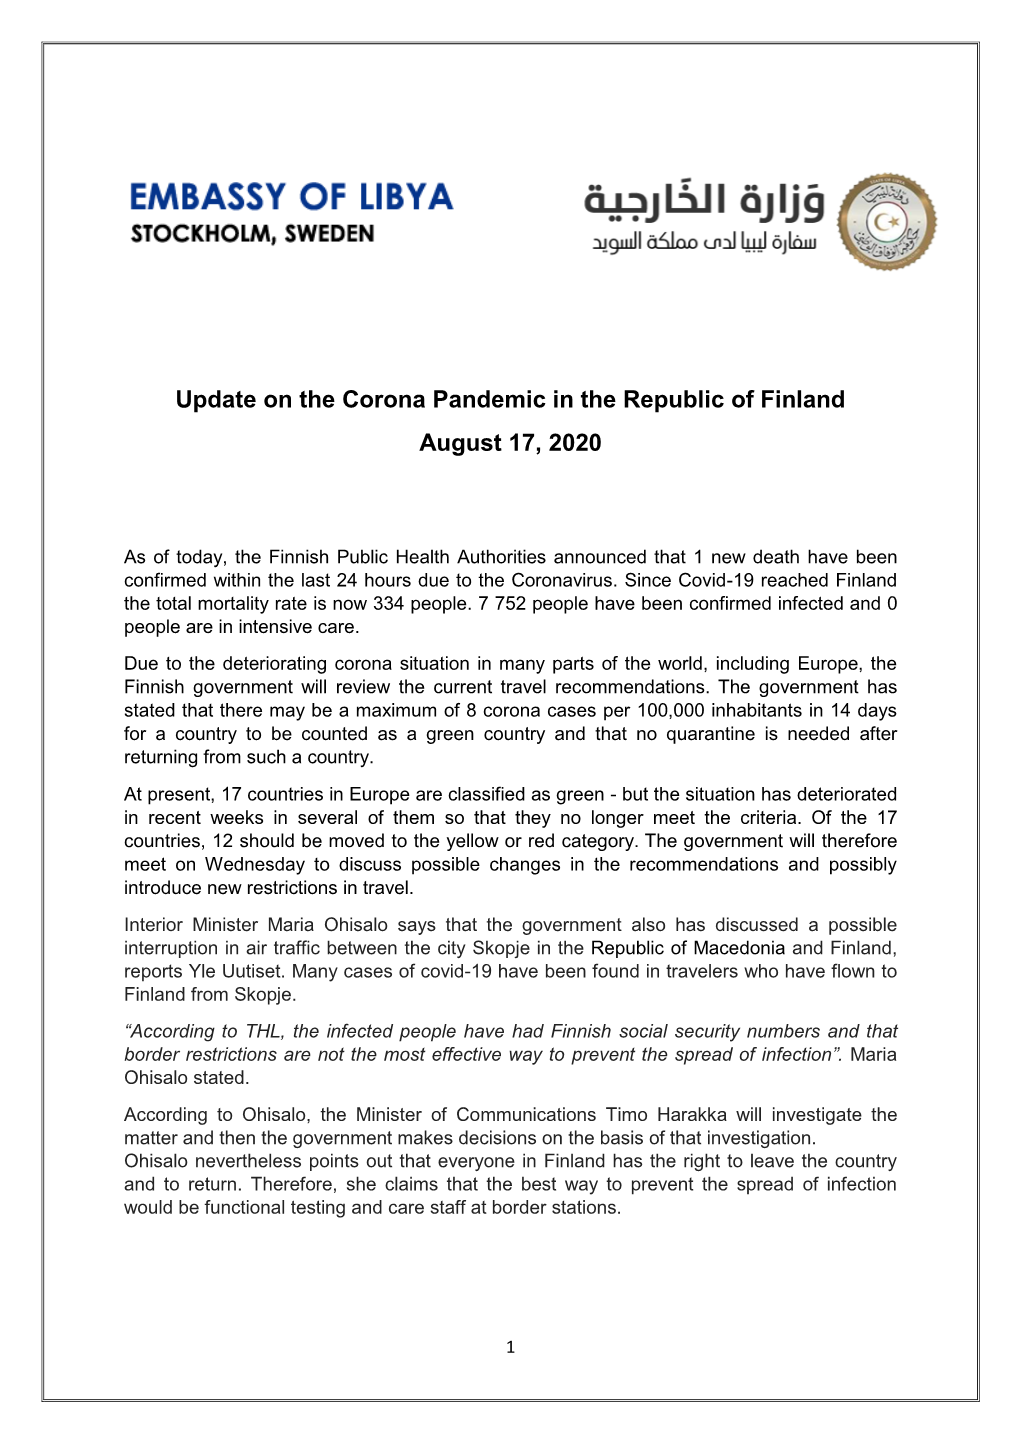 Update on the Corona Pandemic in the Republic of Finland August 17, 2020